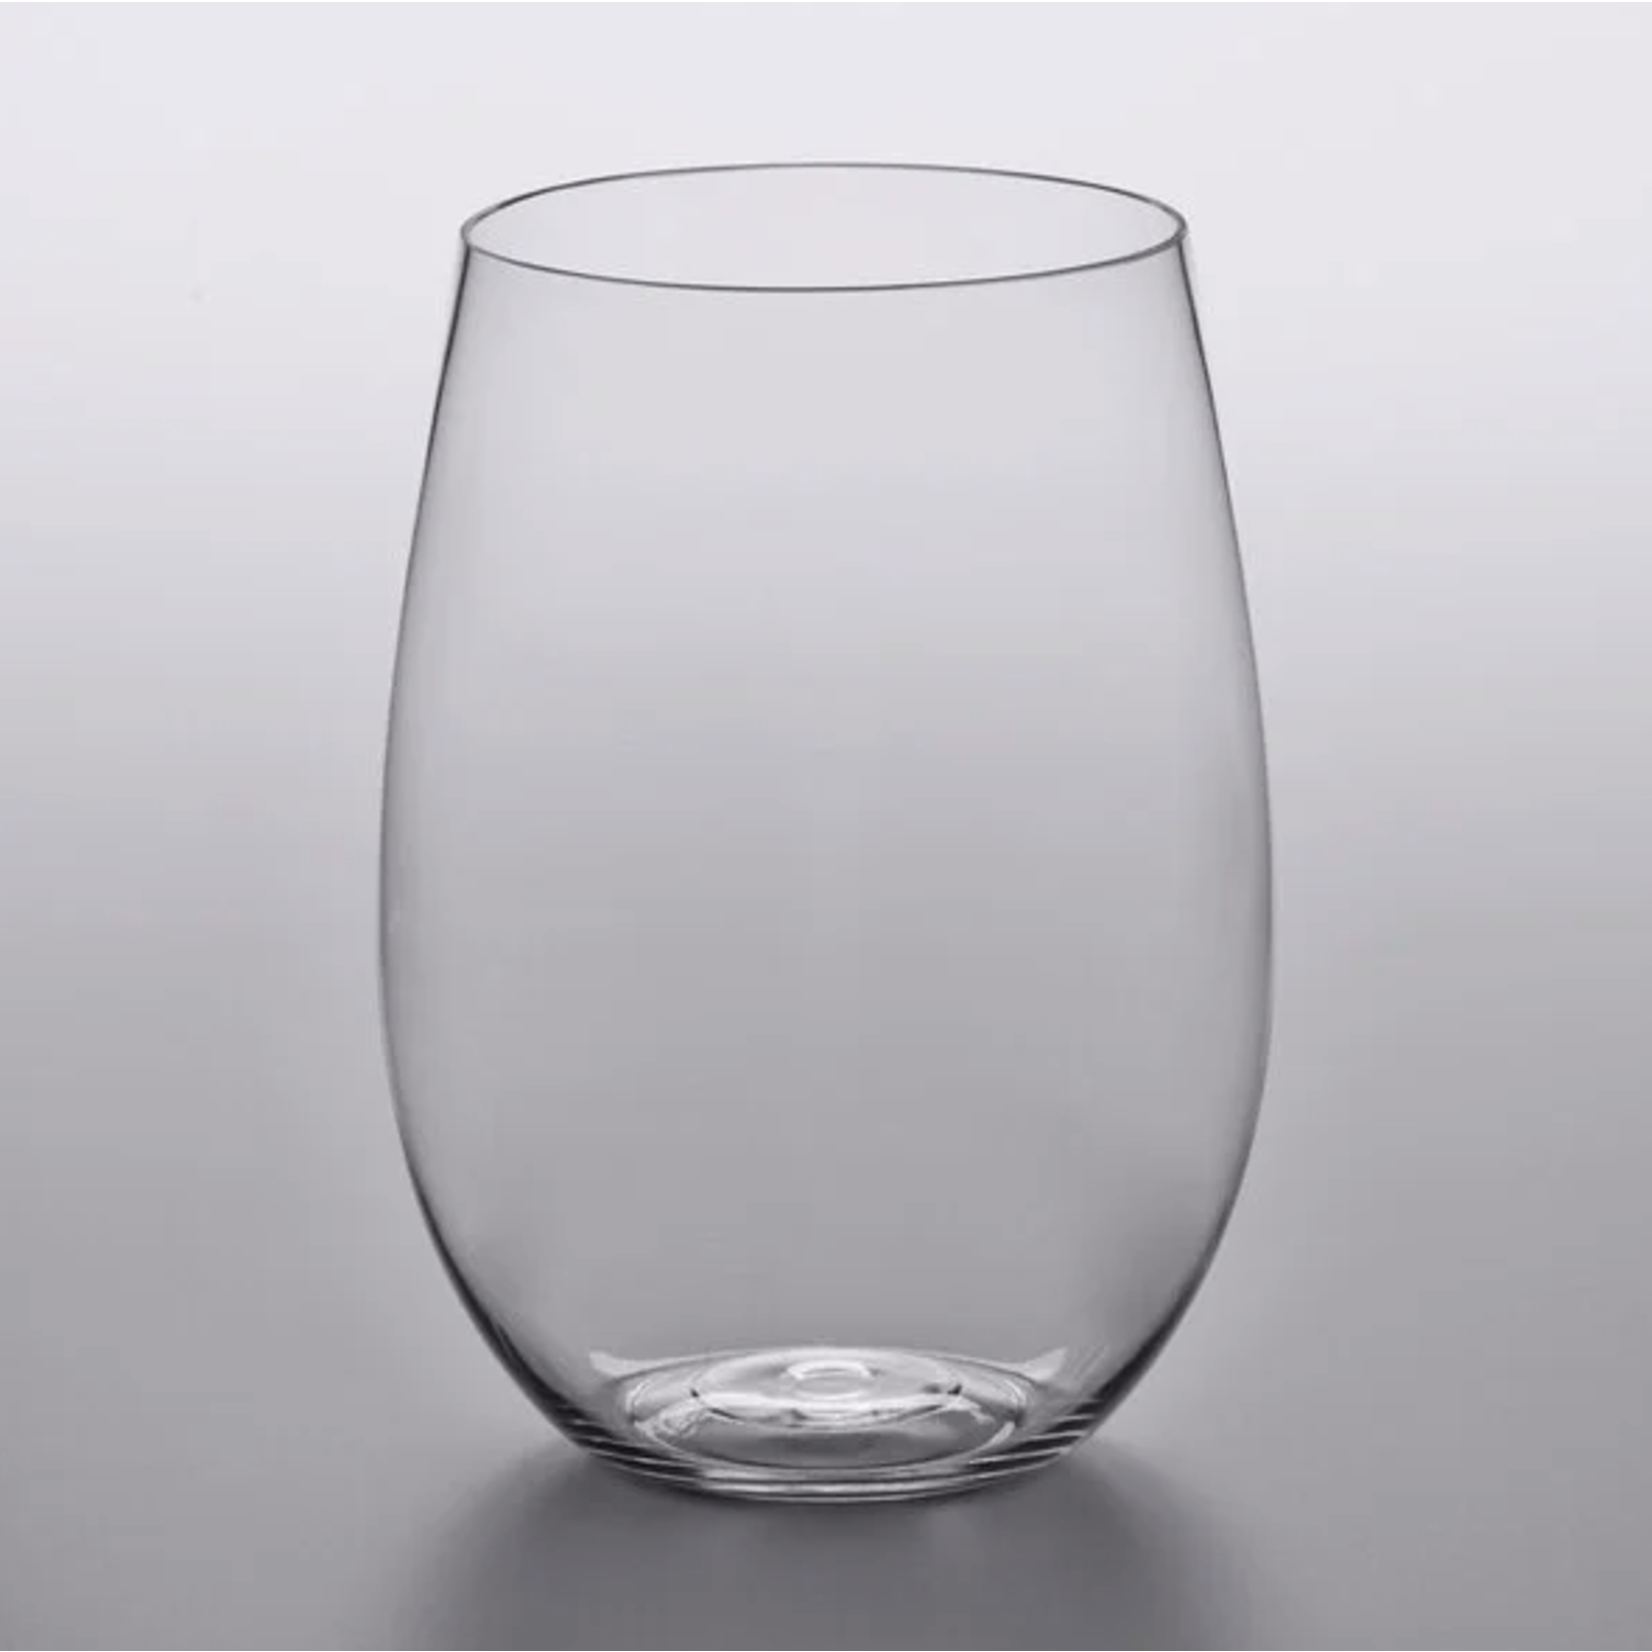 Webstaurant Clear Plastic Stemless Wine Glass - 16 oz - 16/pack